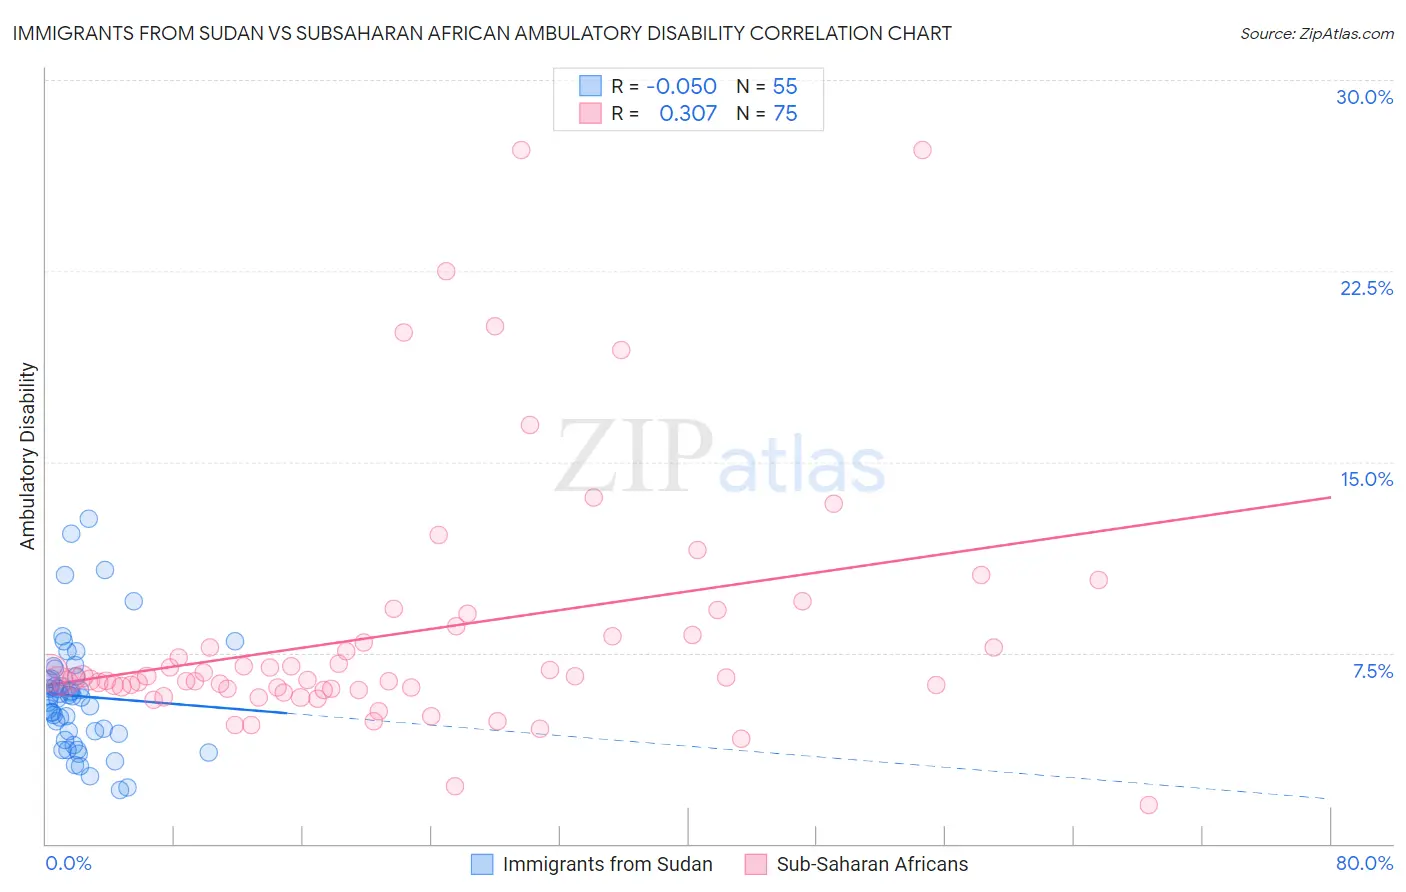 Immigrants from Sudan vs Subsaharan African Ambulatory Disability